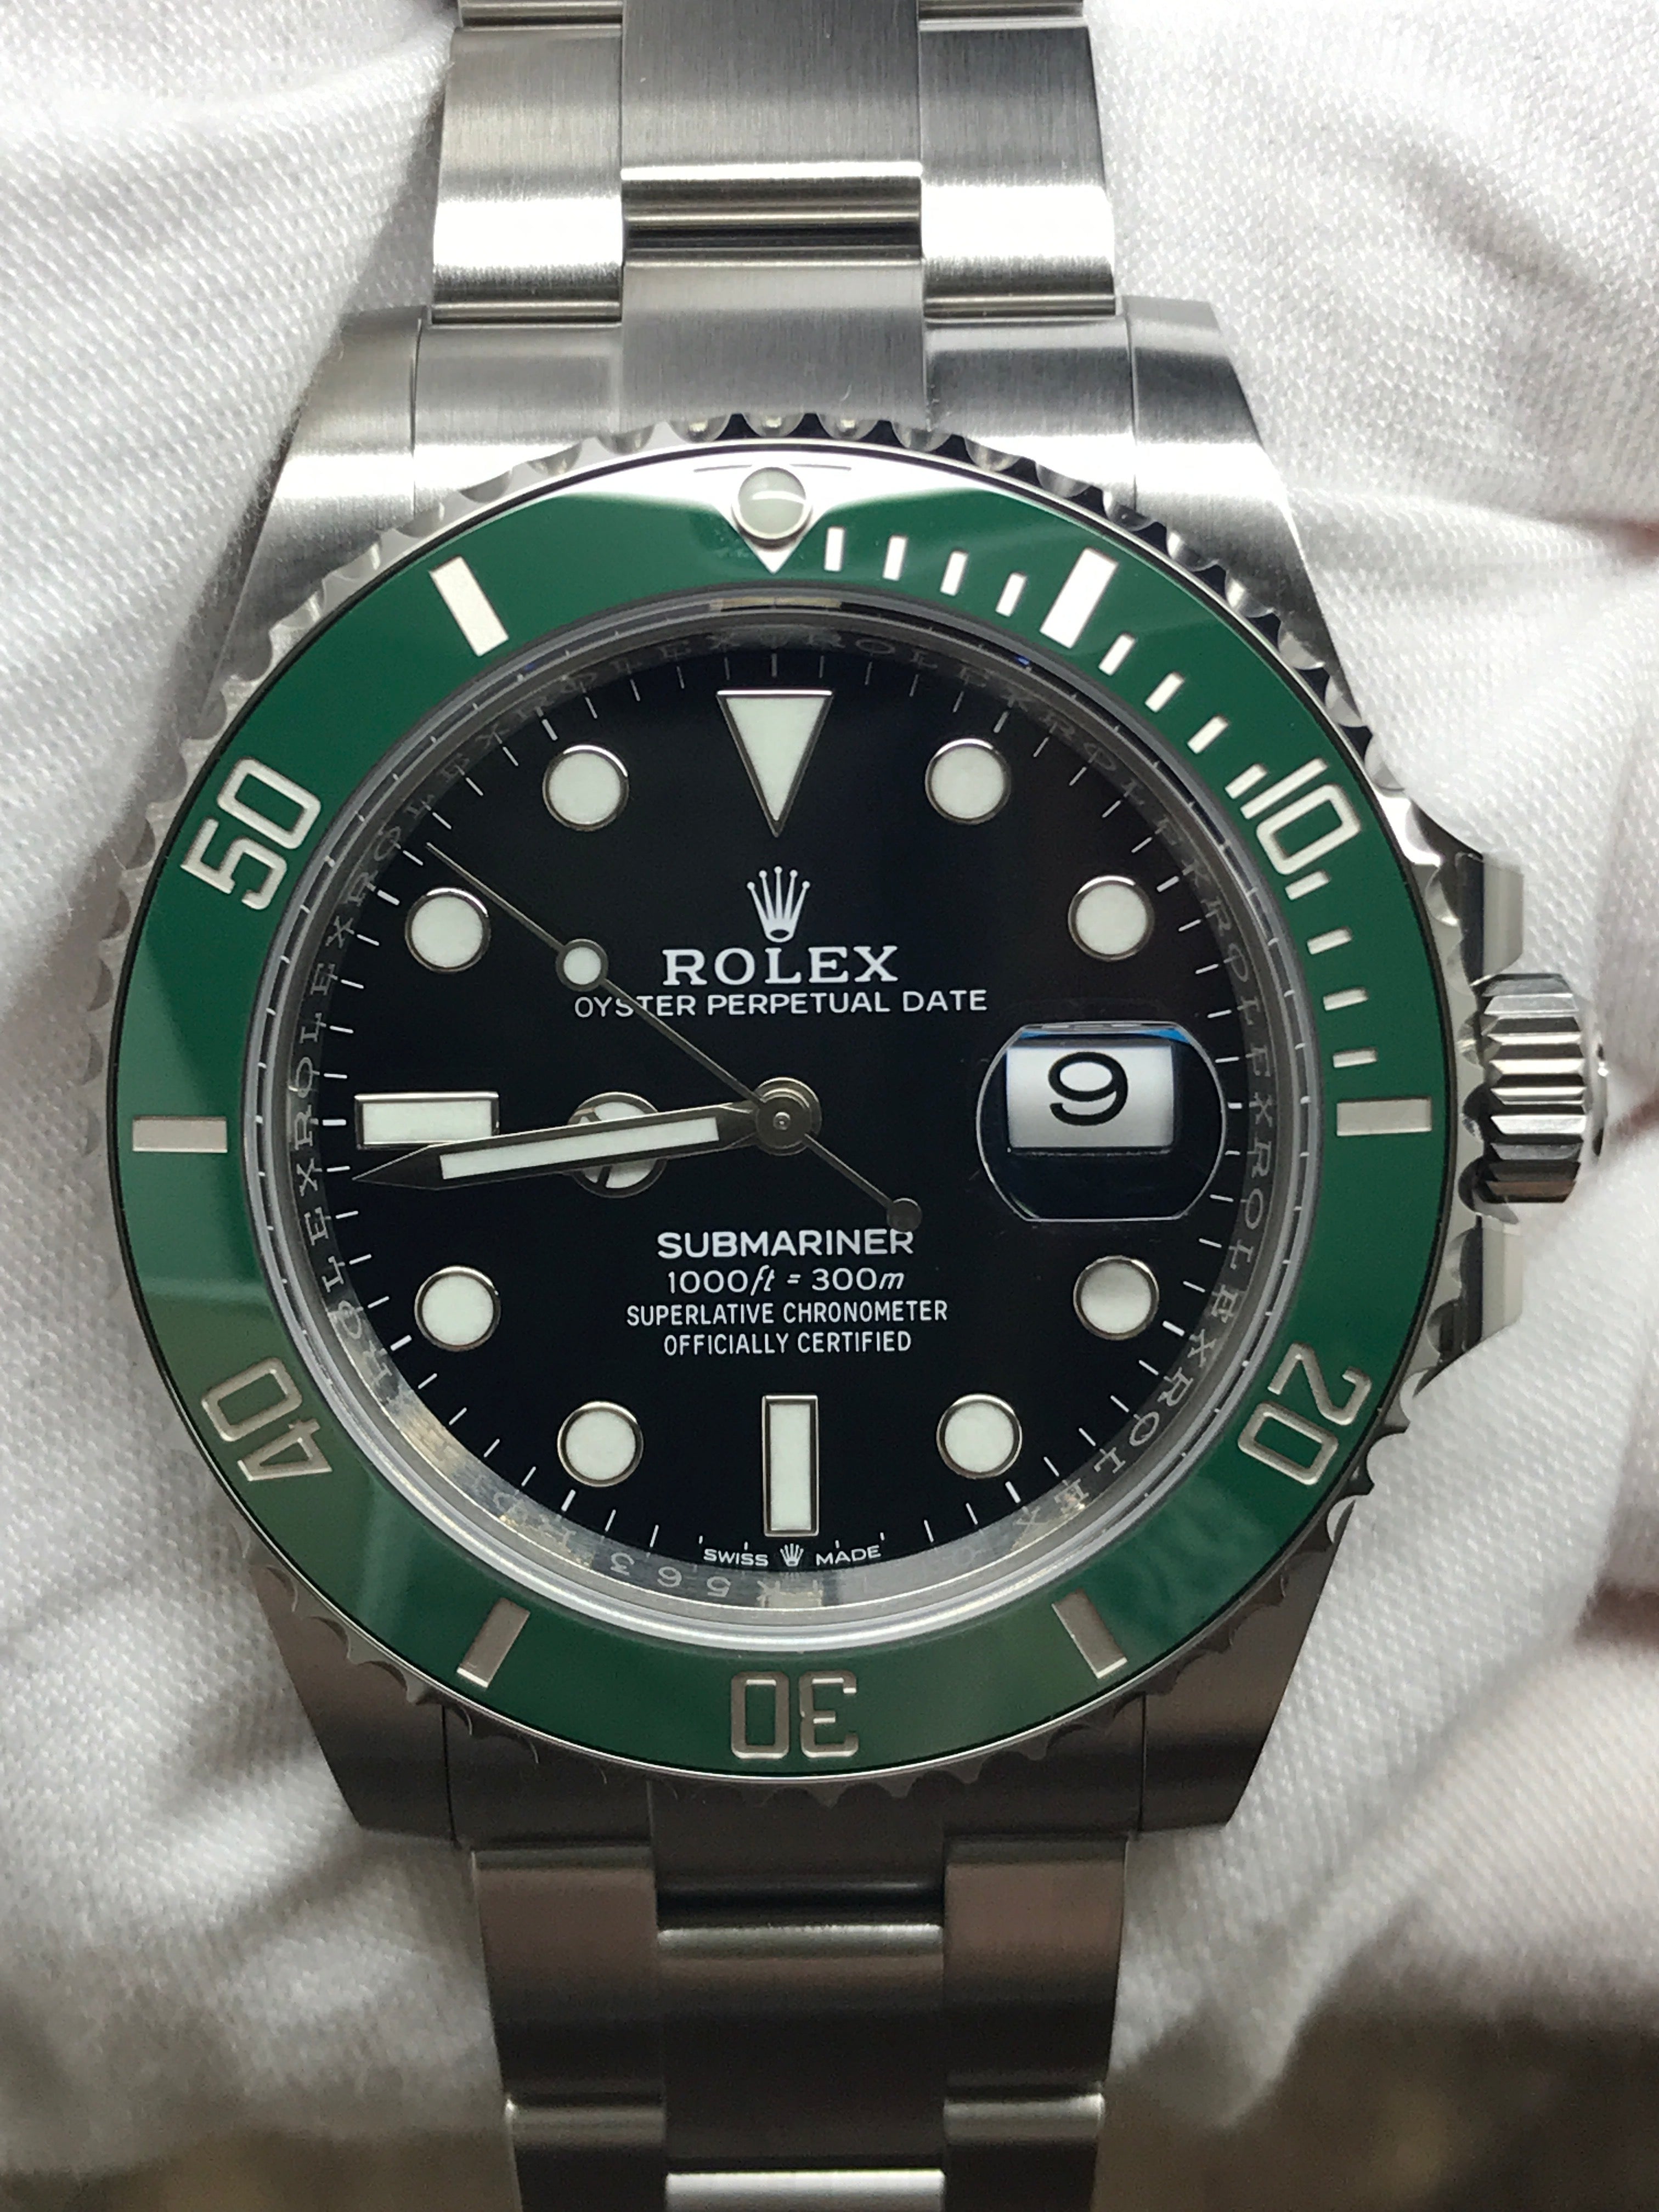 Authenticated Used Rolex Submariner Date 126610LV green bezel black dial  watch 